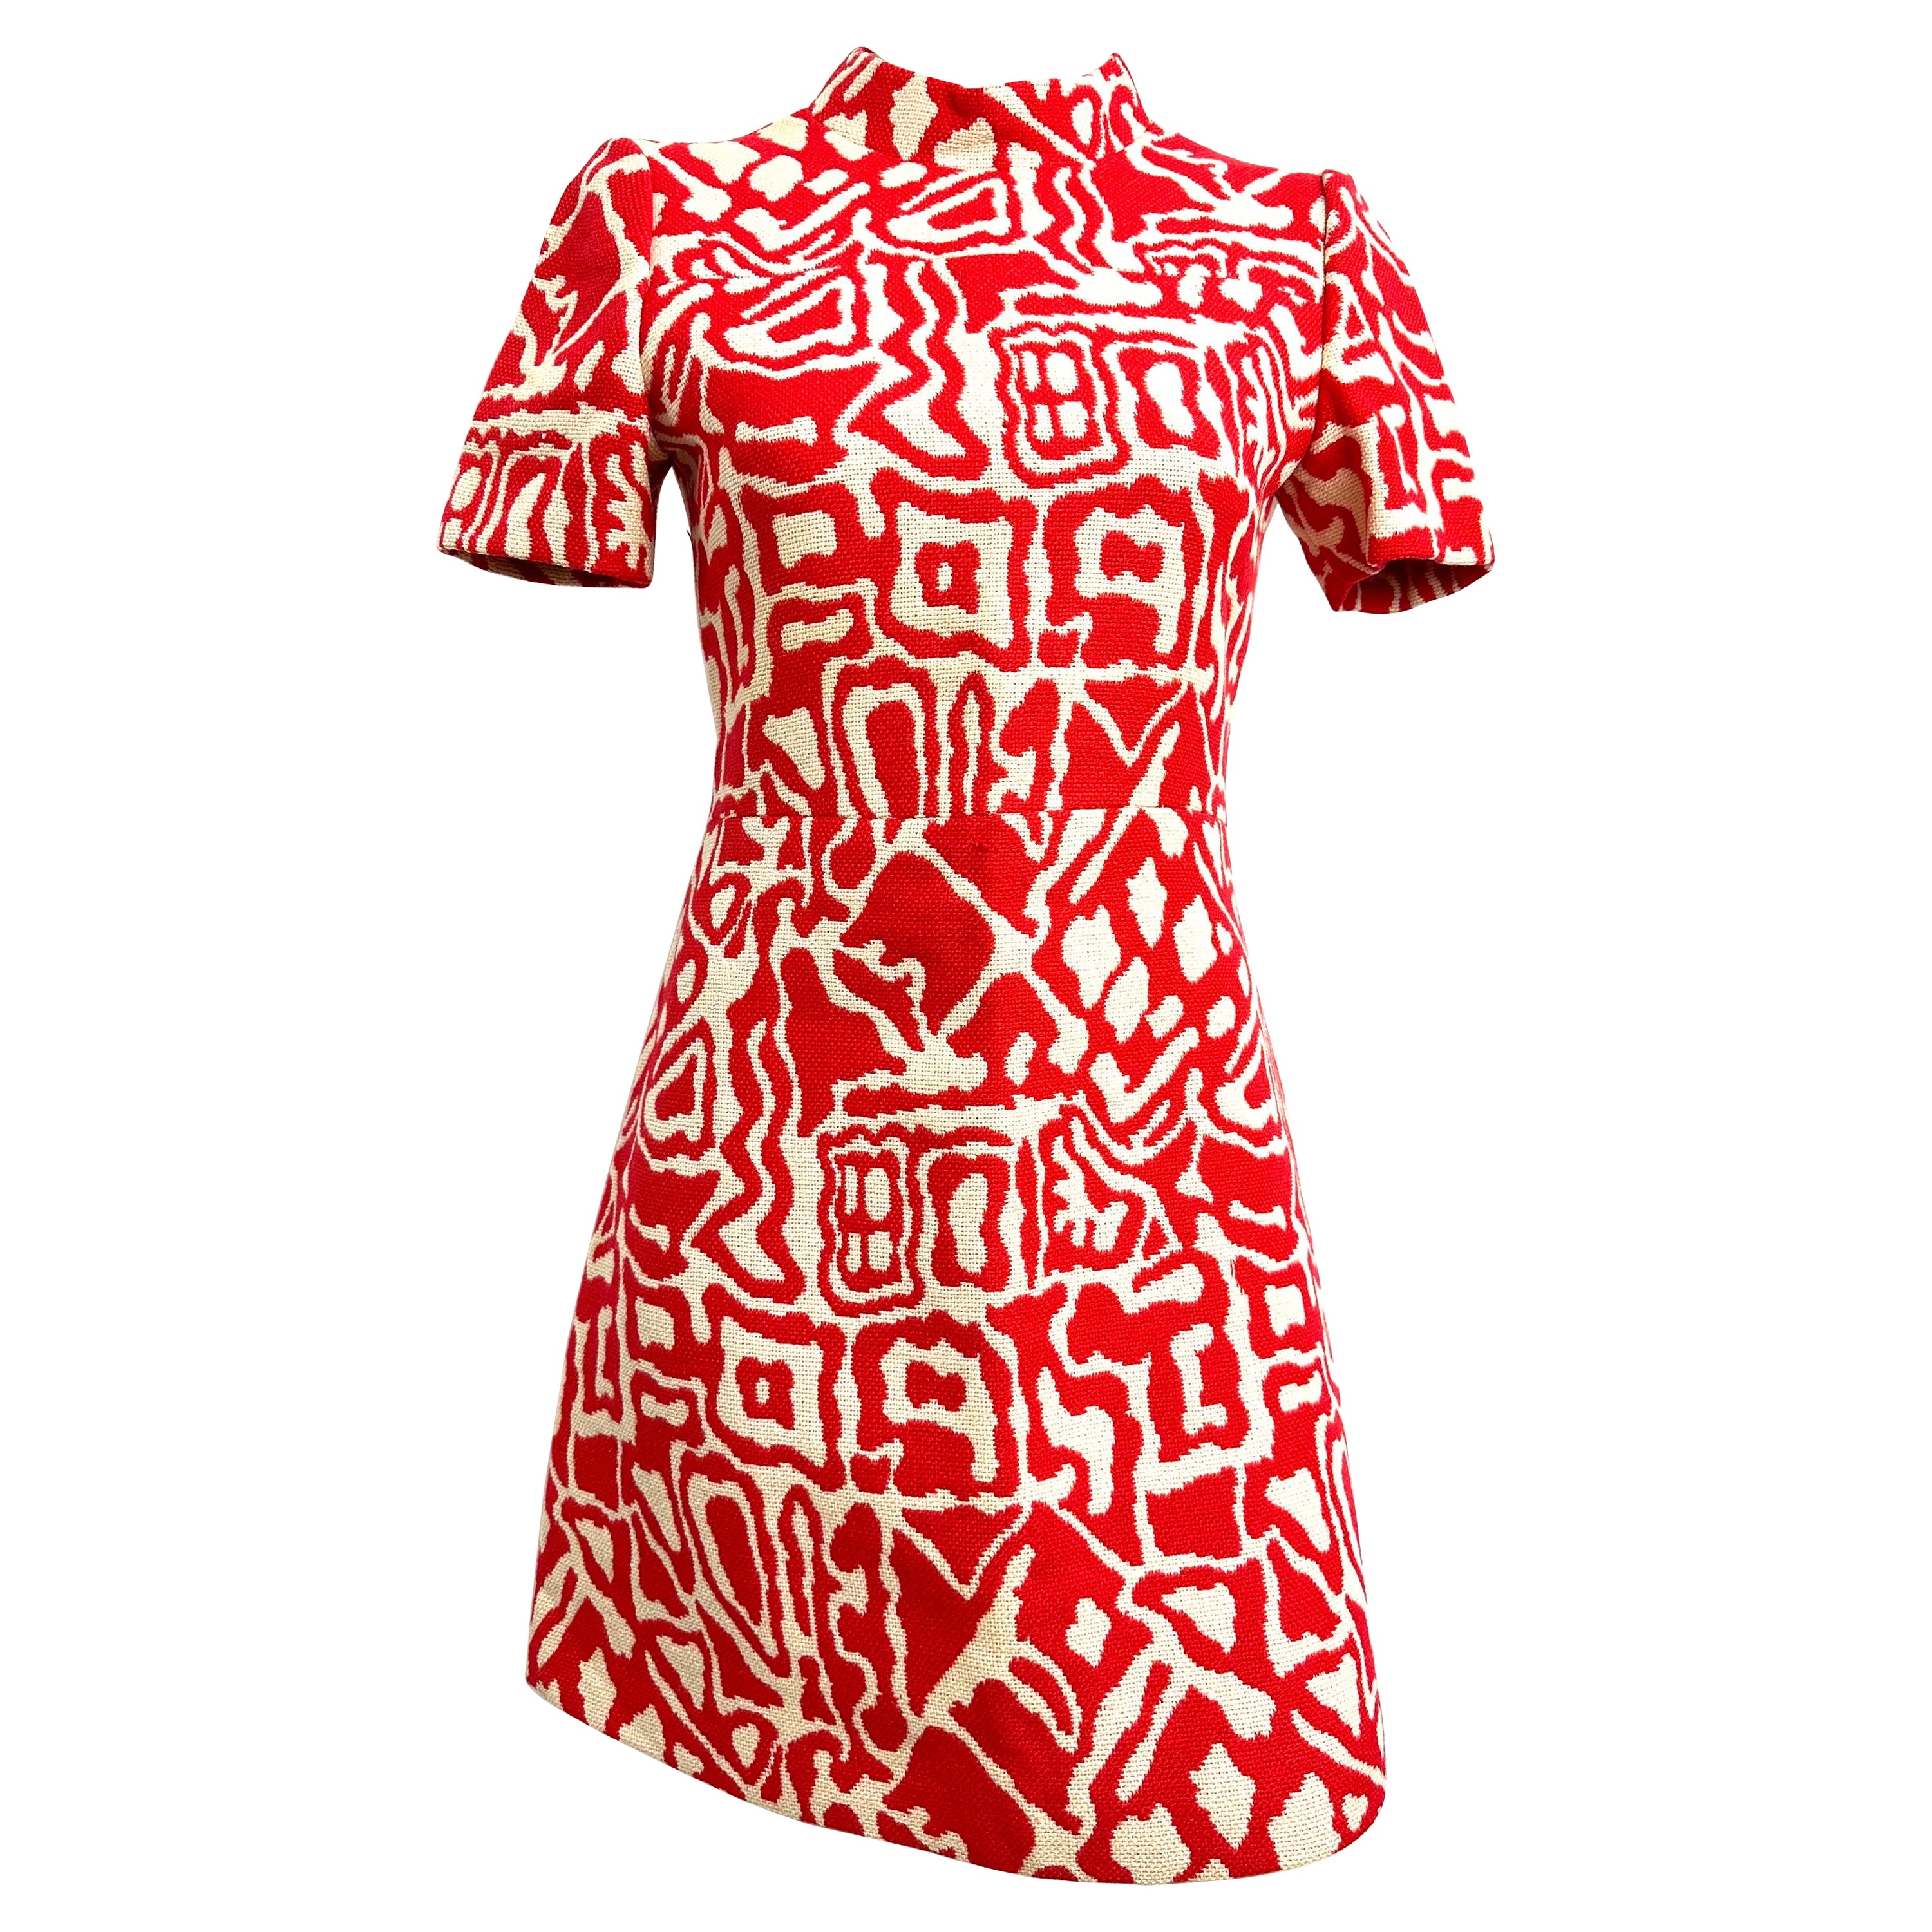 Early 1970s trapeze dress by tes lapidus with brutalist motif For Sale